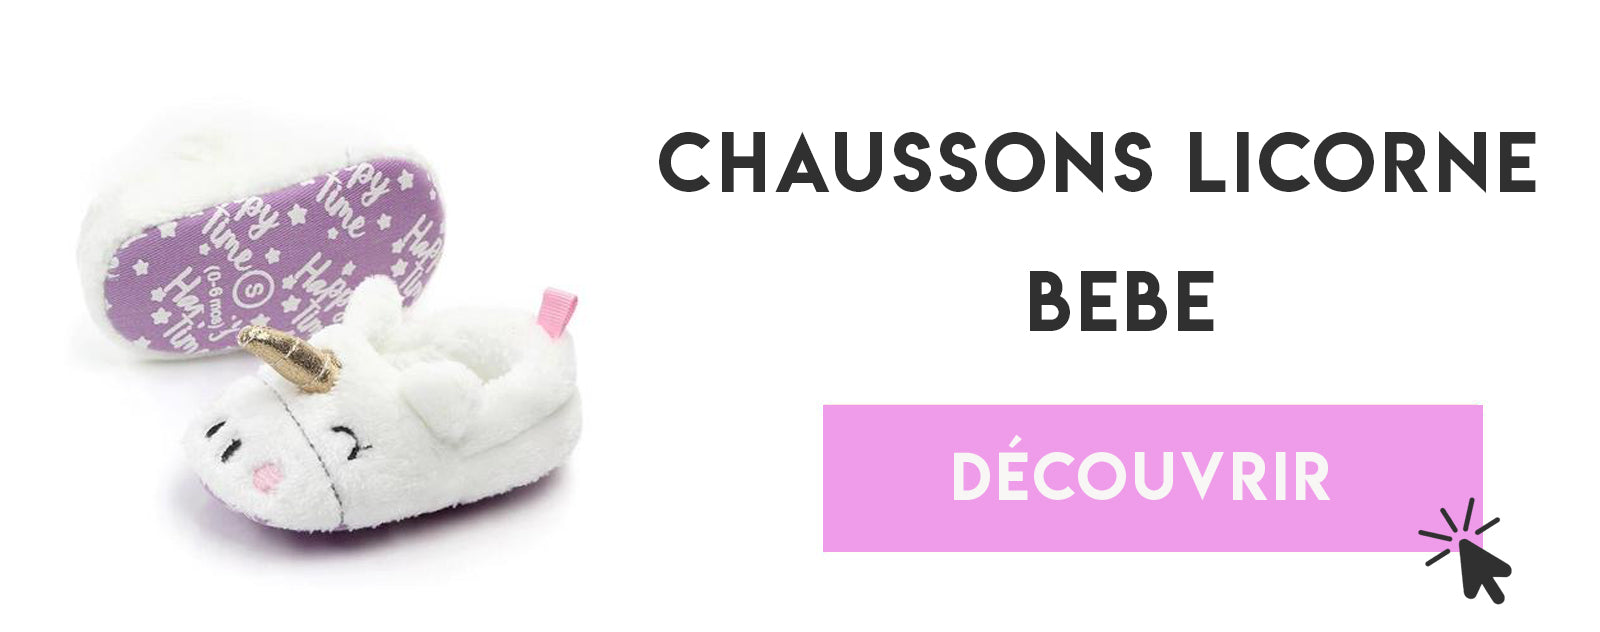 meilleurs chaussons bebe style licorne